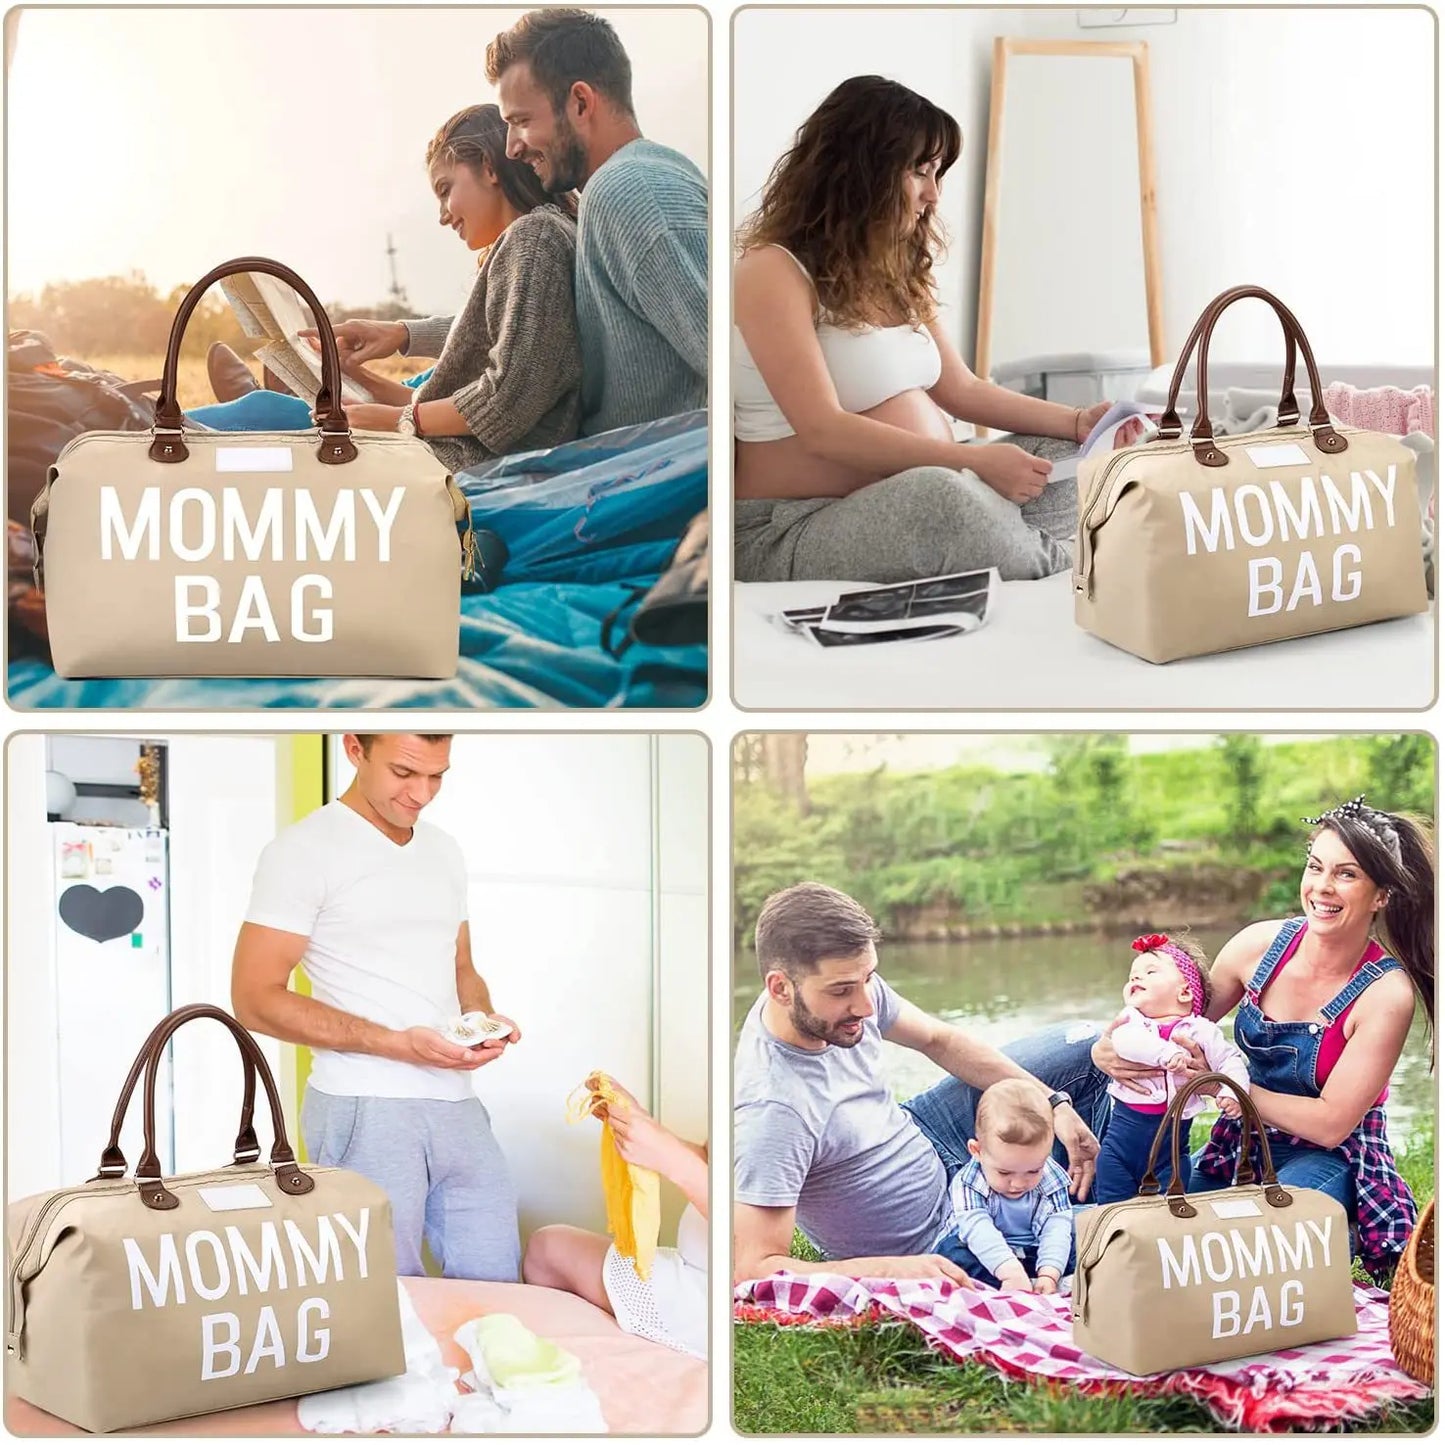 Diaper Bag "Mommy Bag" with Accessories Multivariant